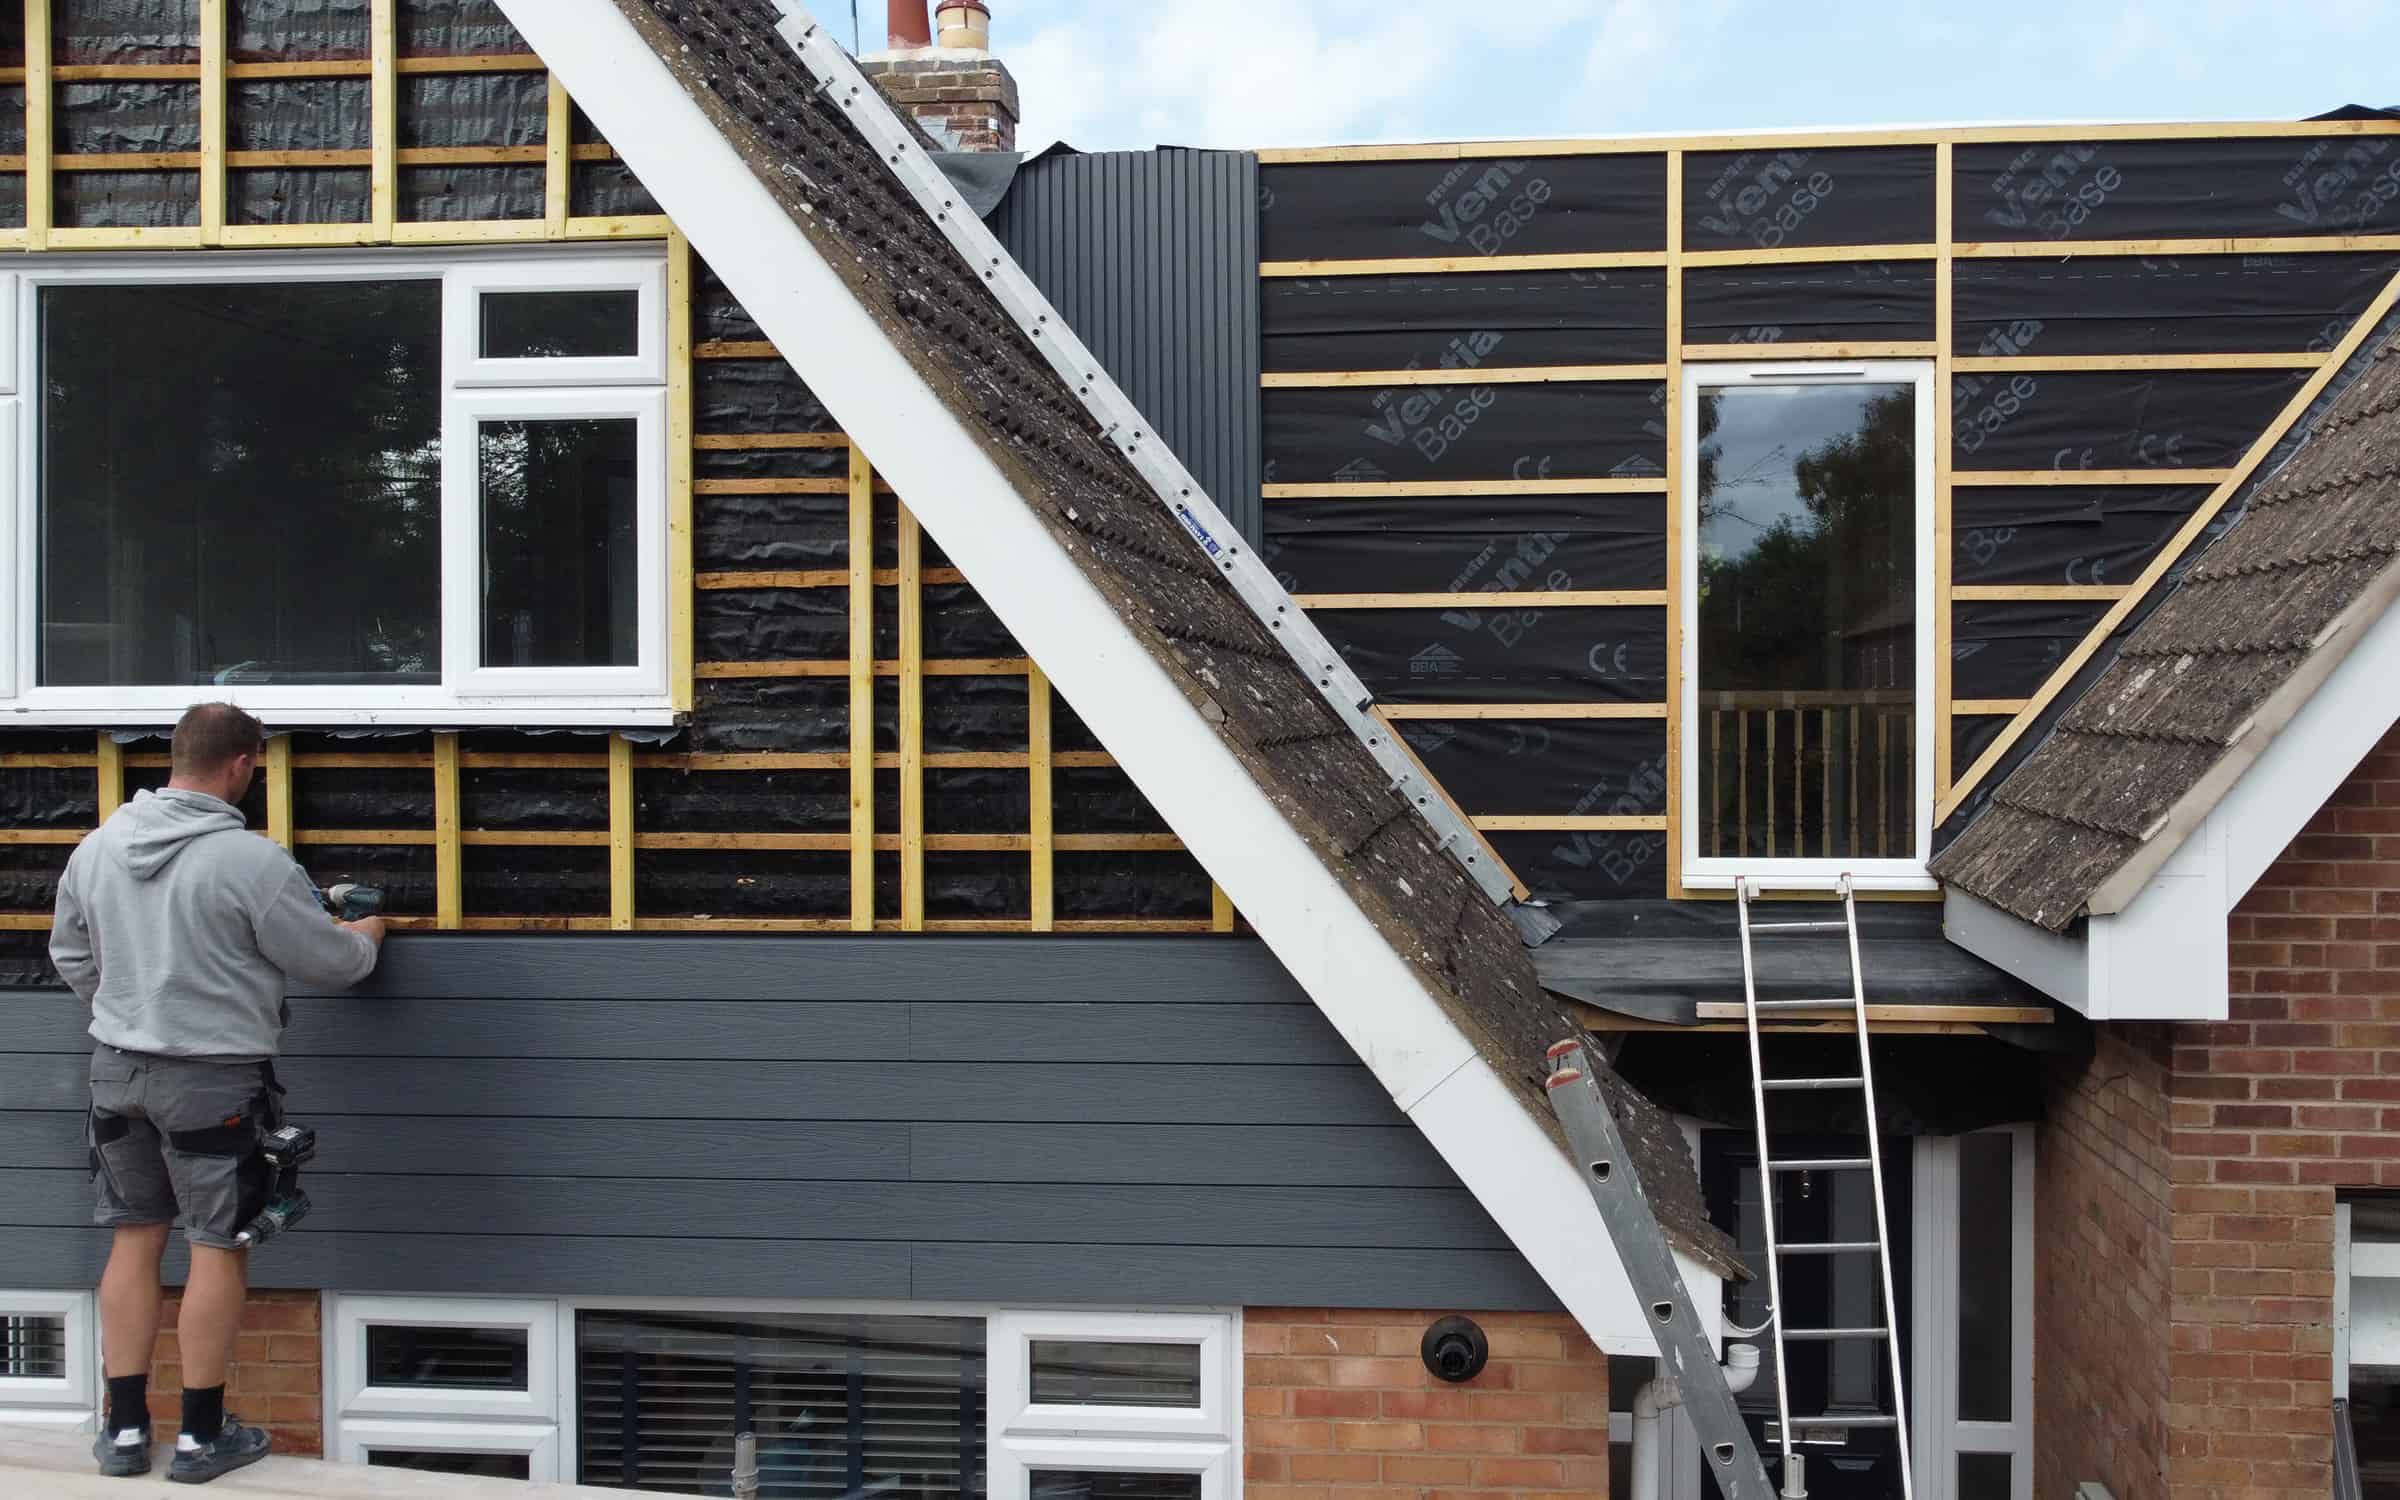 can you install composite cladding in a high wind area?